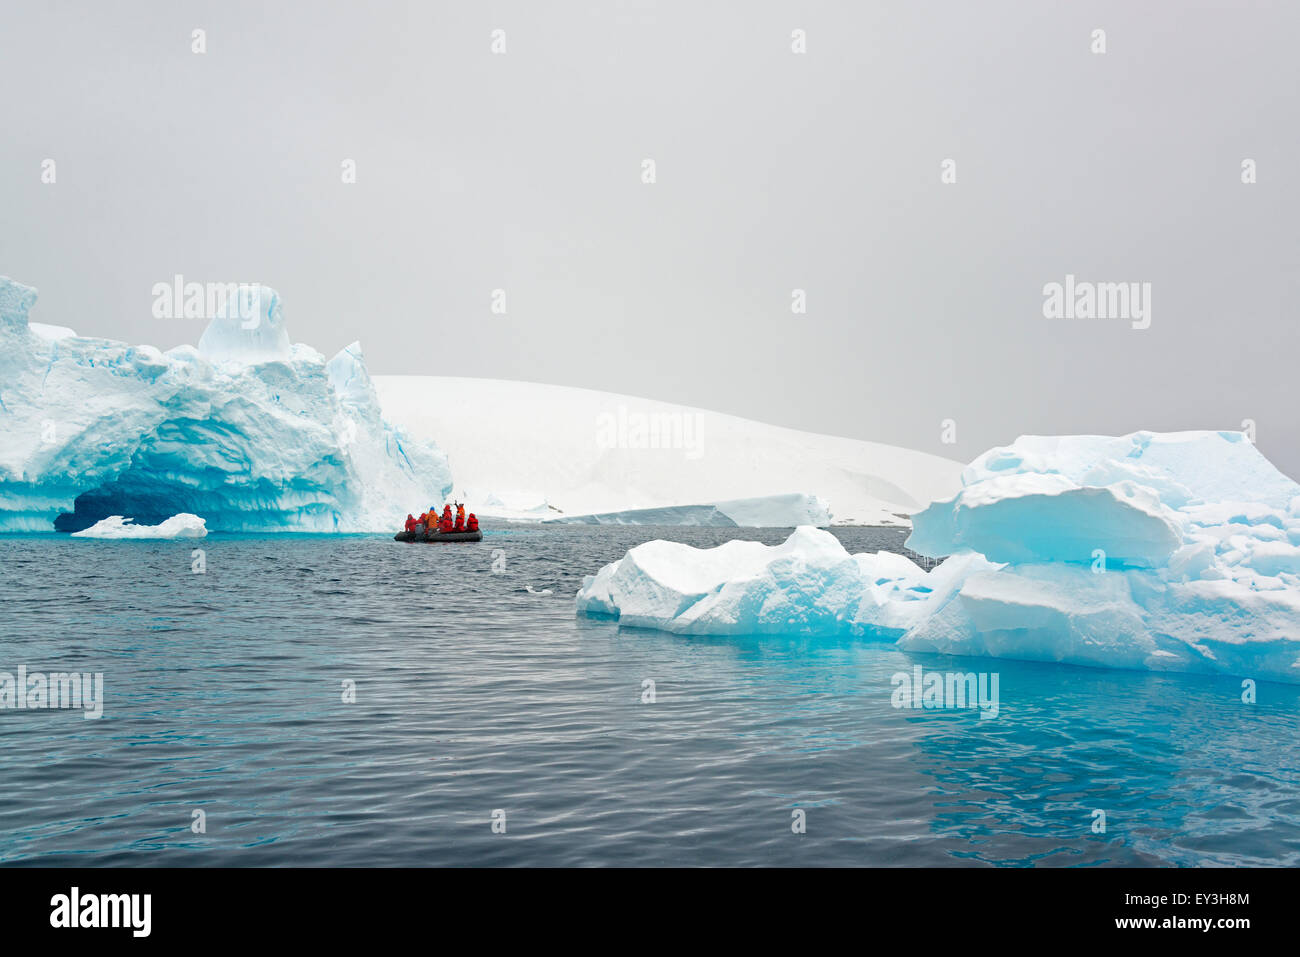 Group of people crossing the ocean in the Antarctic in a rubber boat, icebergs in the background. Stock Photo